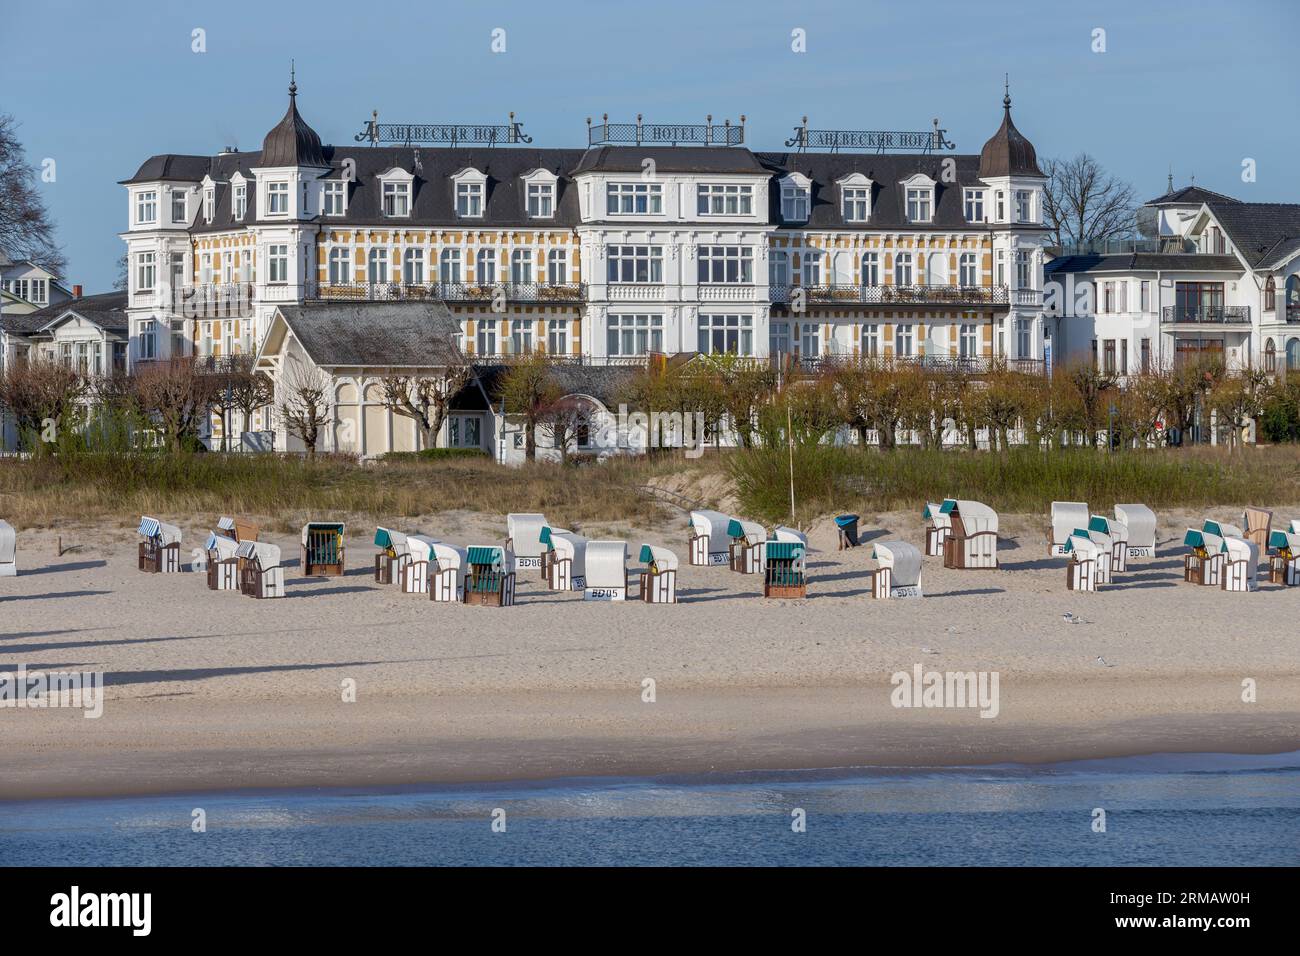 Ahlbeck, Germany - April 17, 2014: scenic view to beach and old historic Hotel Ahlbecker hof. Stock Photo